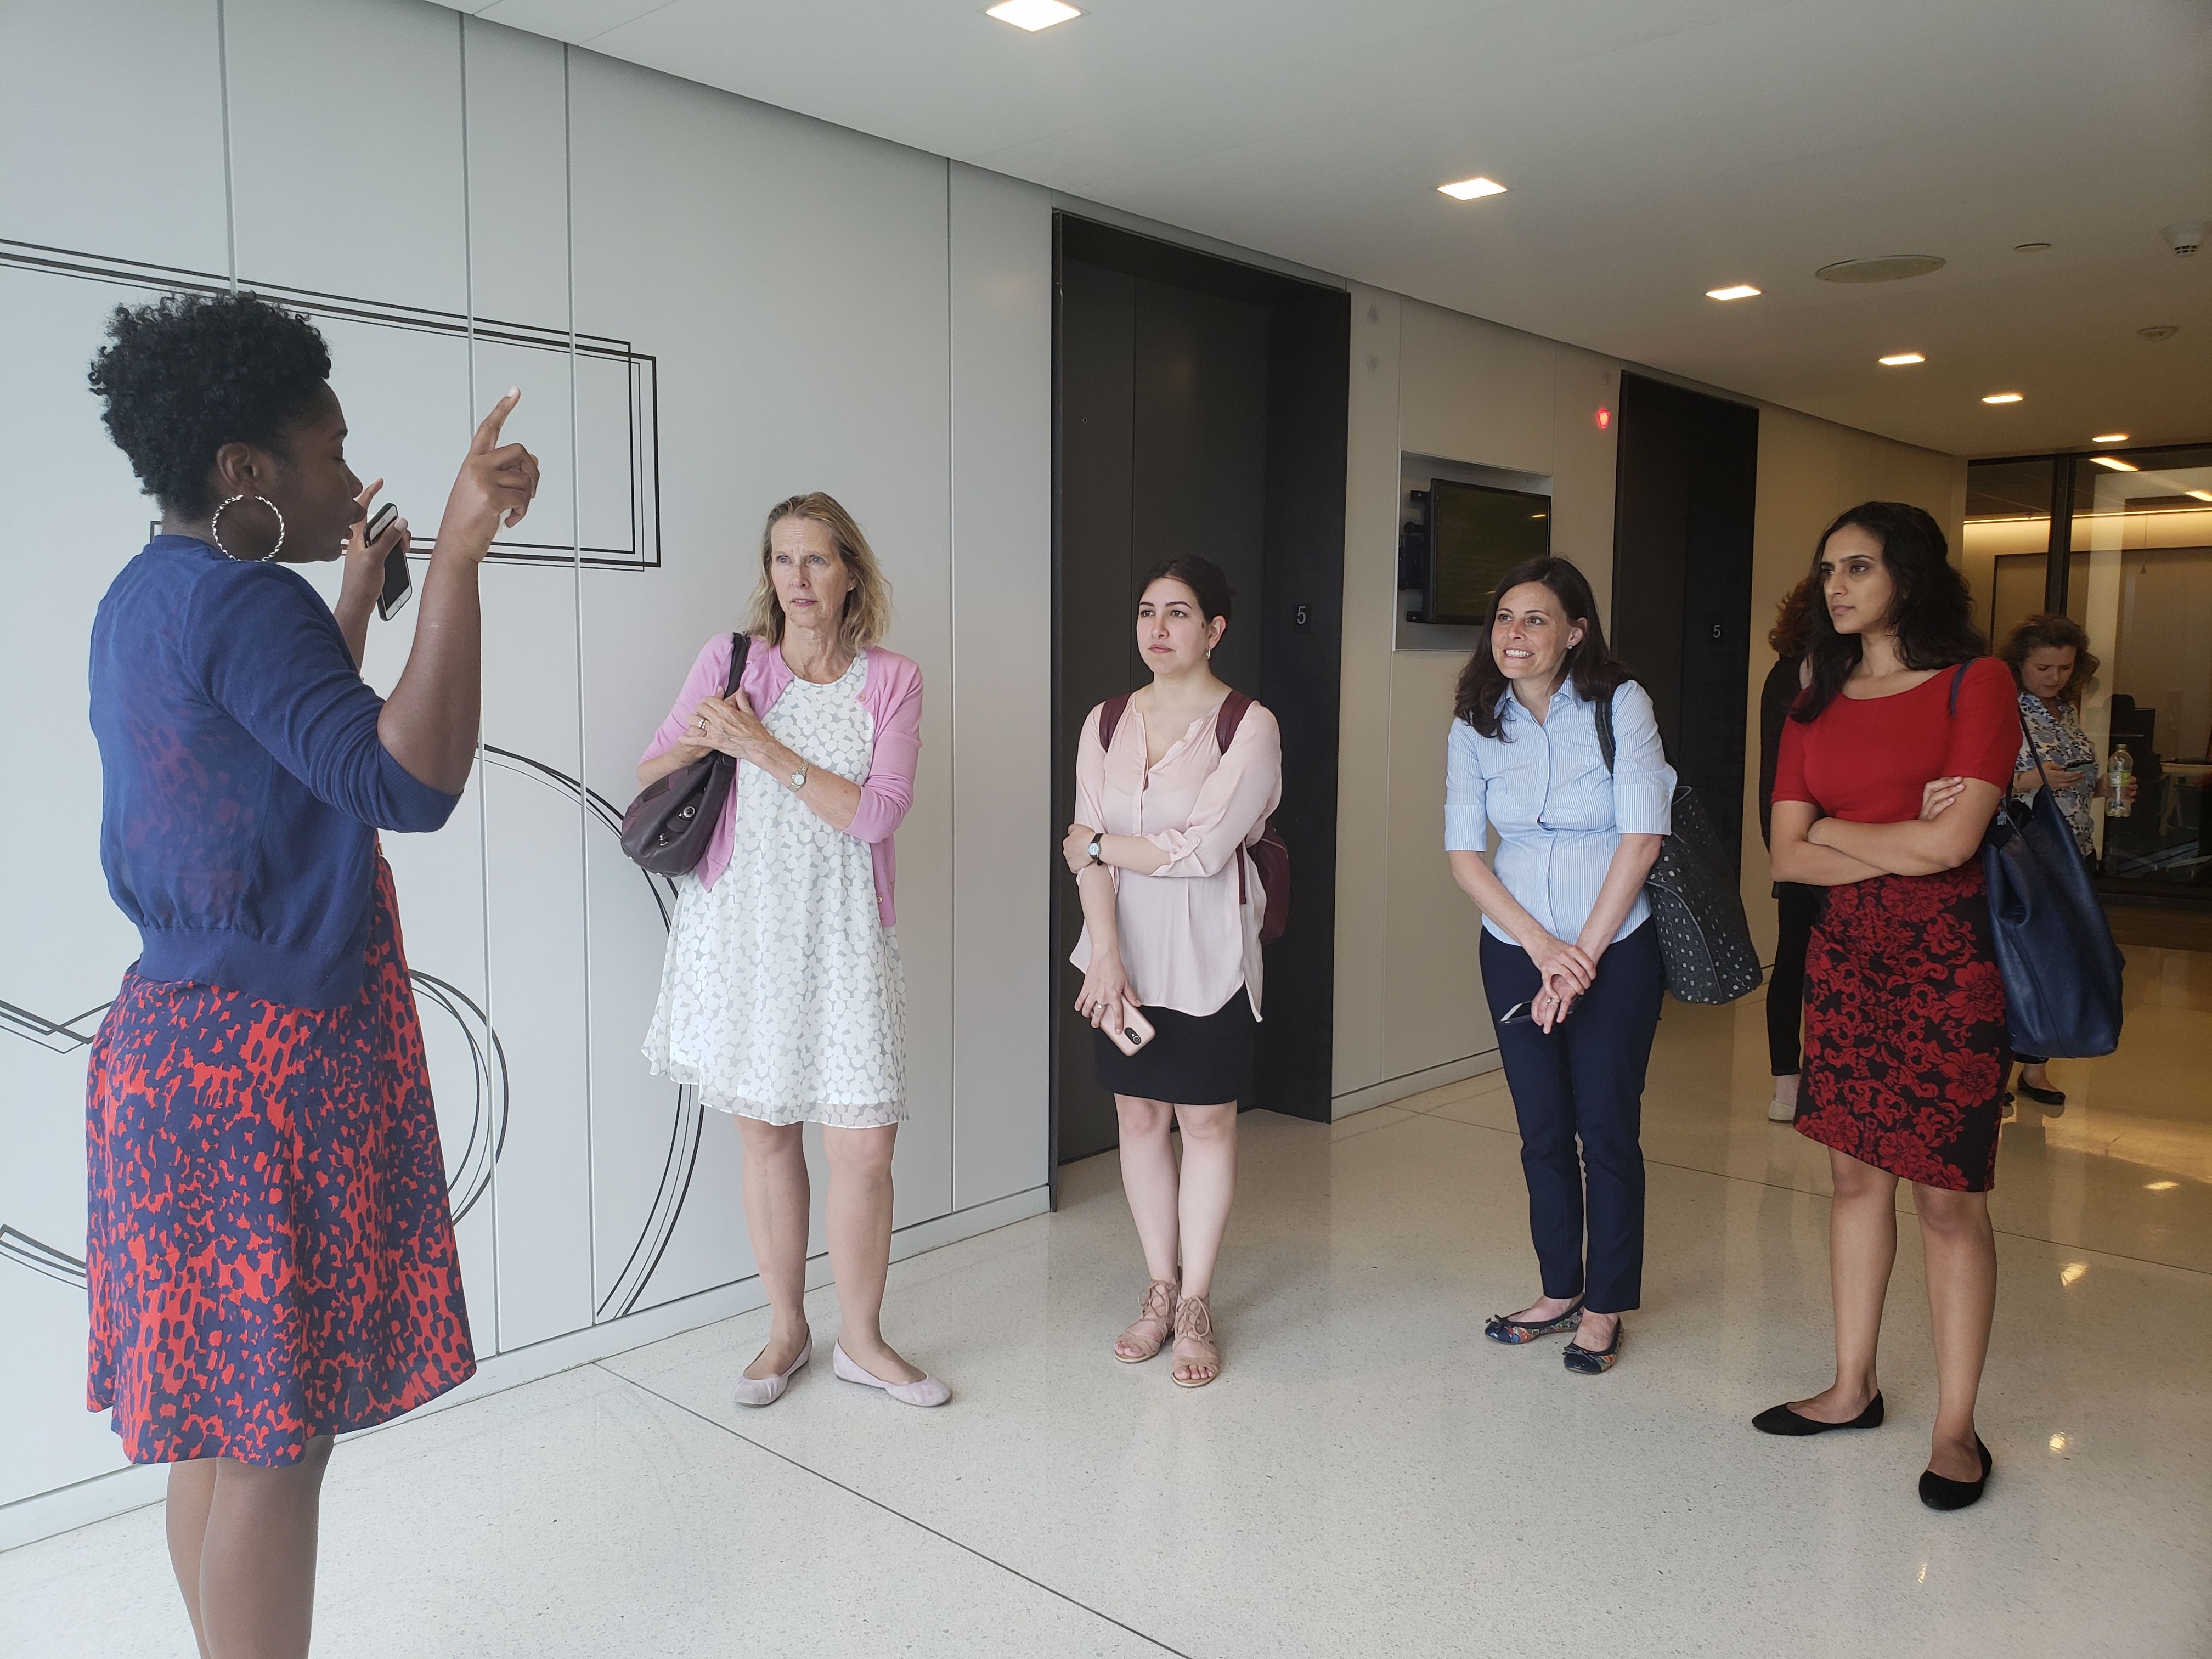 Student fellows tour NPR and view studios, the newsroom, and the famous Tiny Desk. Image by Kayla Sharpe. Washington, D.C., 2018.